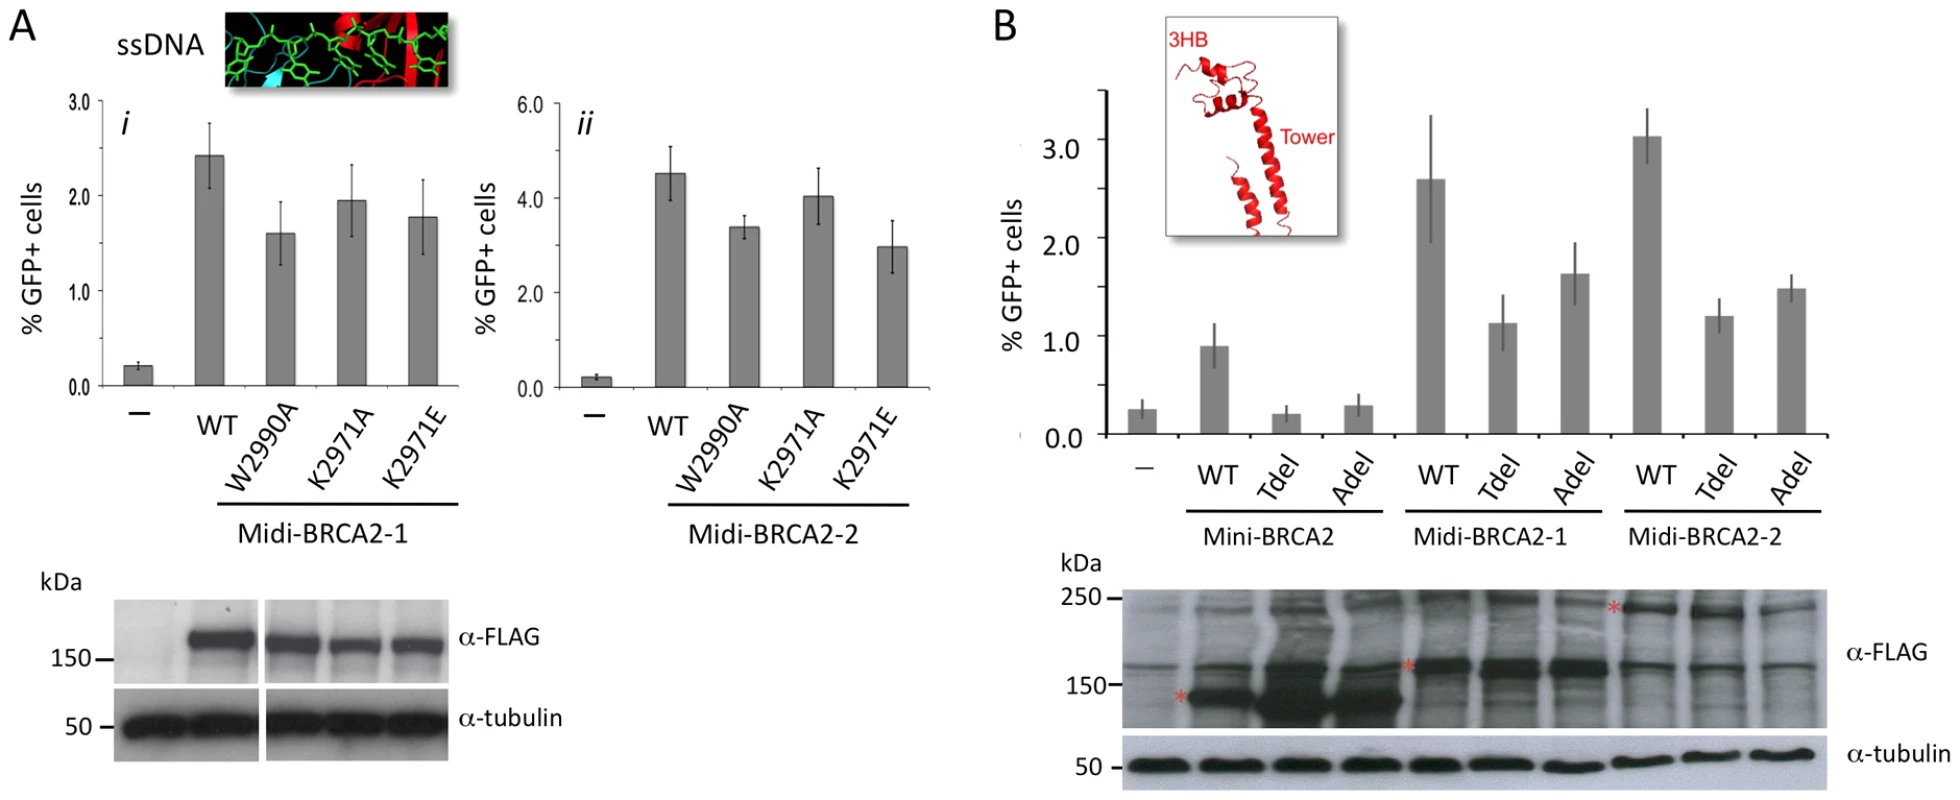 Interaction with PALB2 partially compensates for mutations in the DNA binding domain.